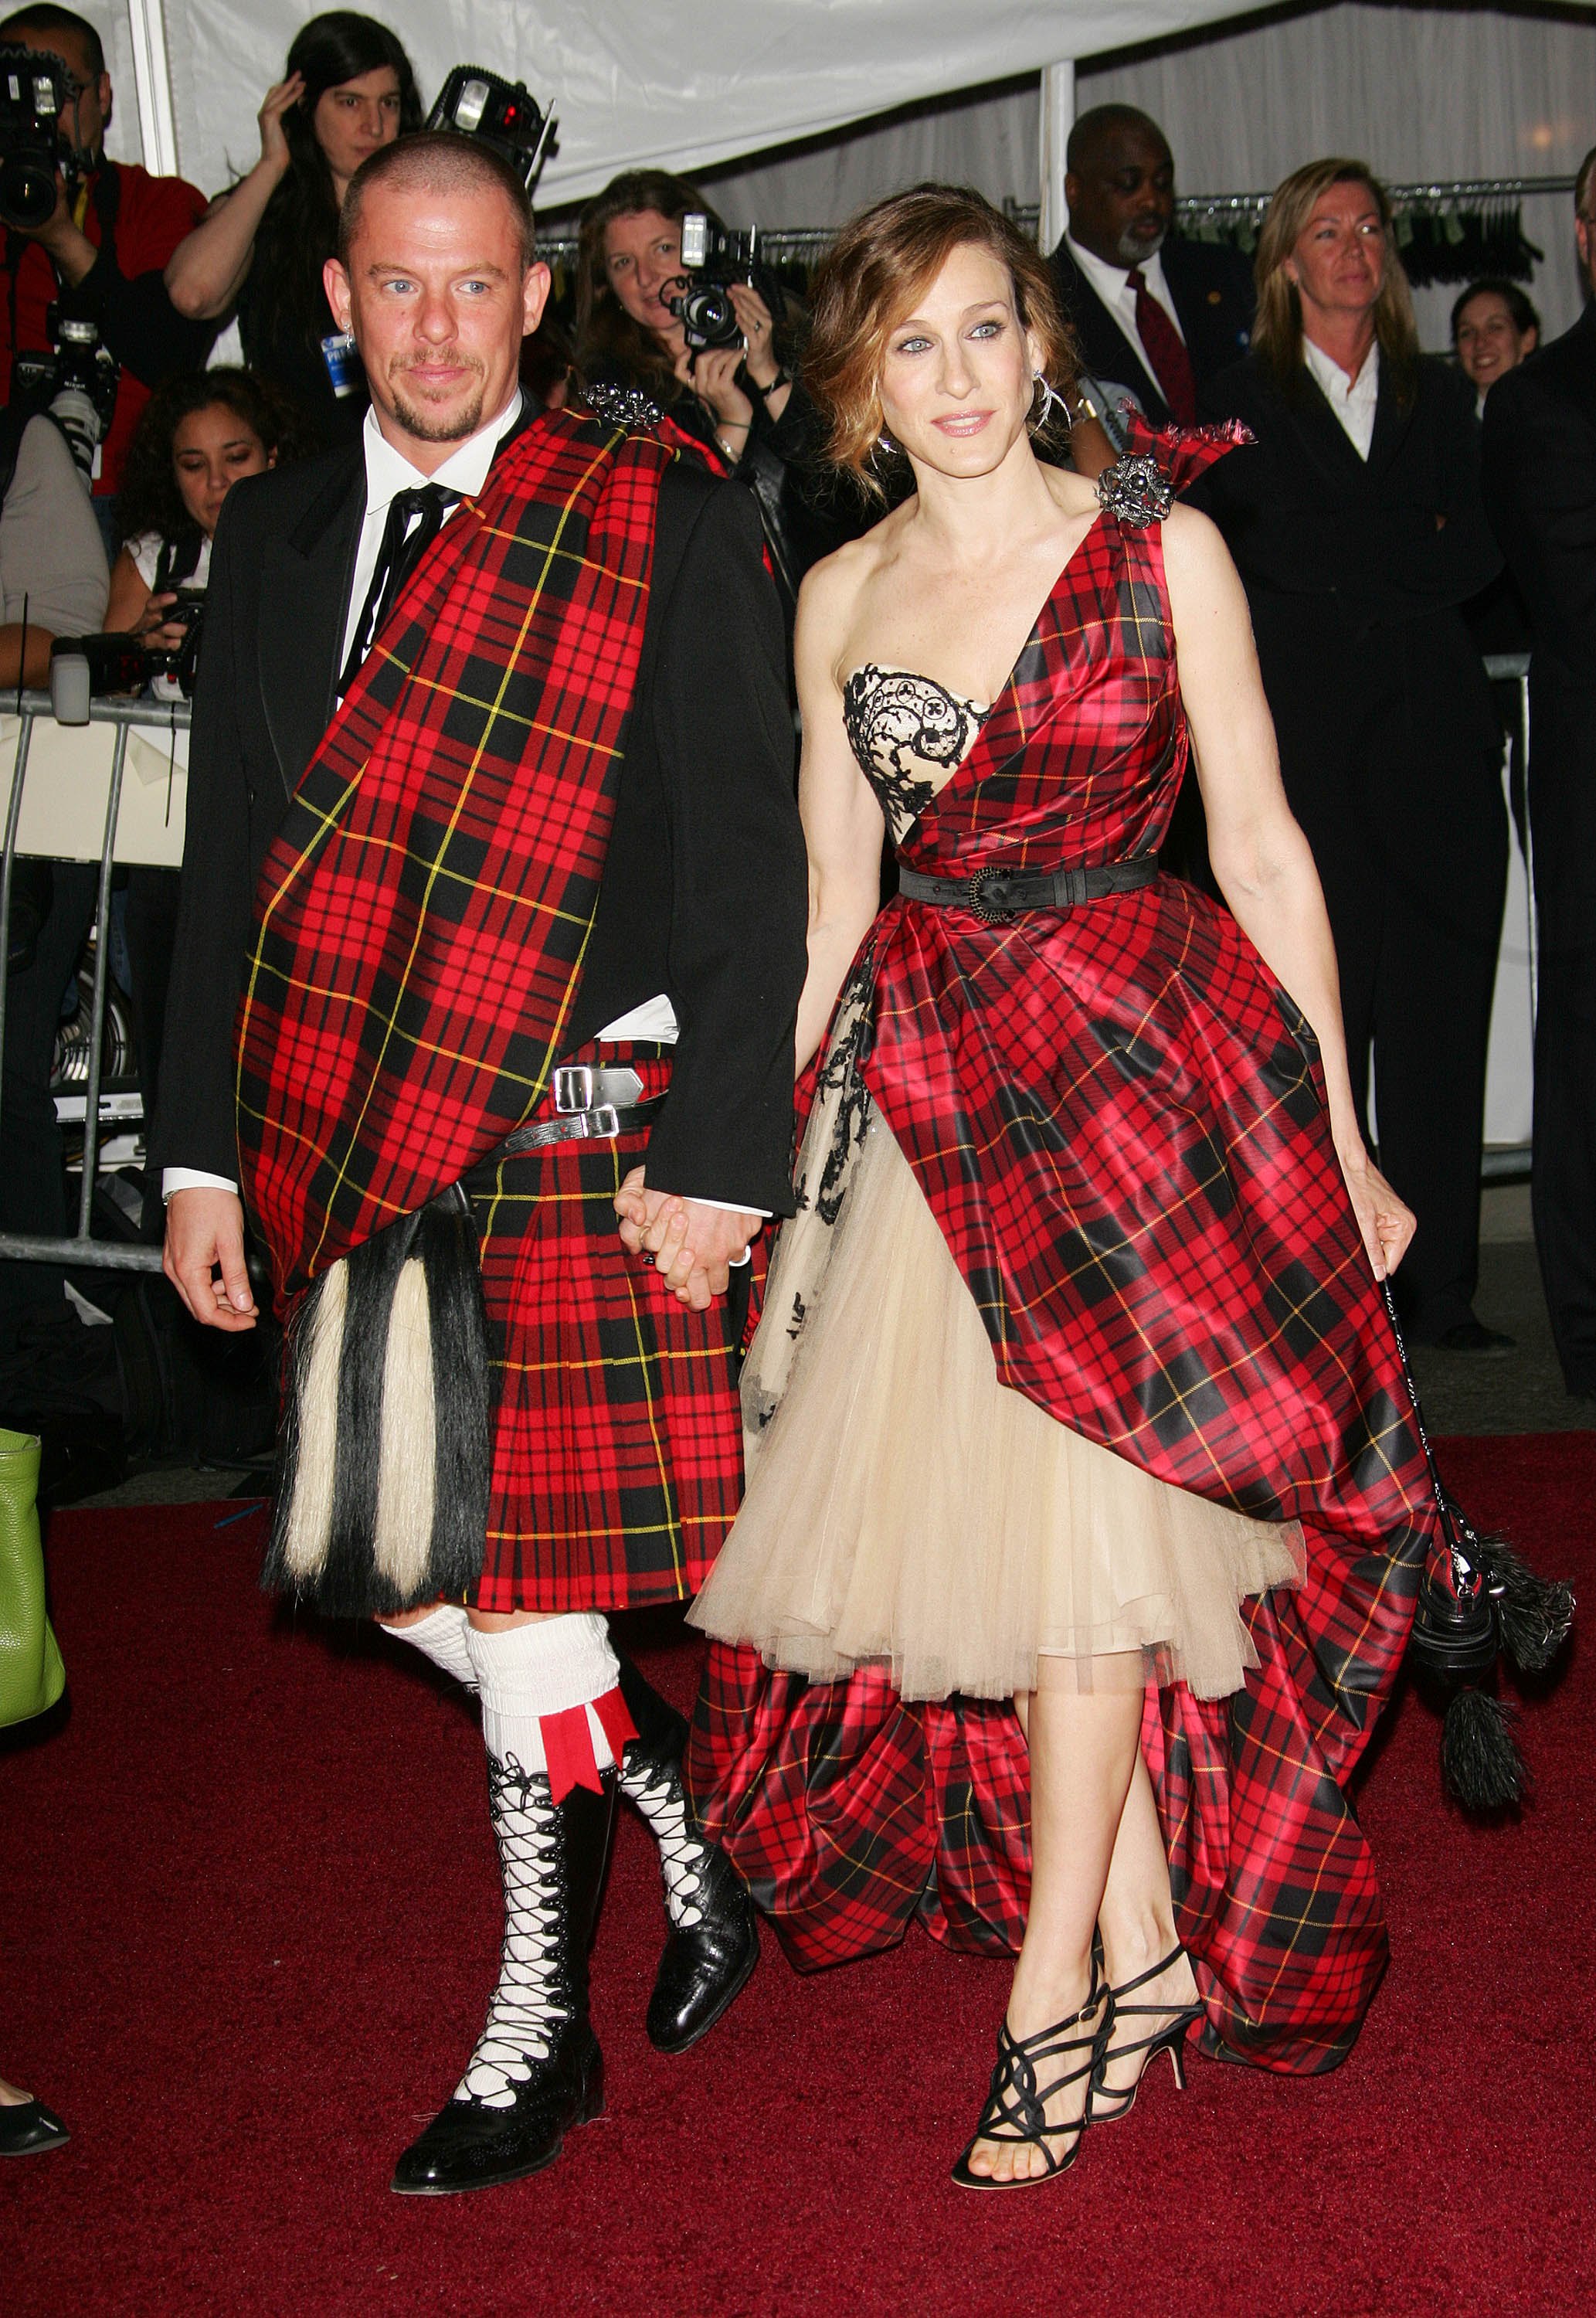 Alexander McQueen and Sarah Jessica Parker at the Met Gala 2006